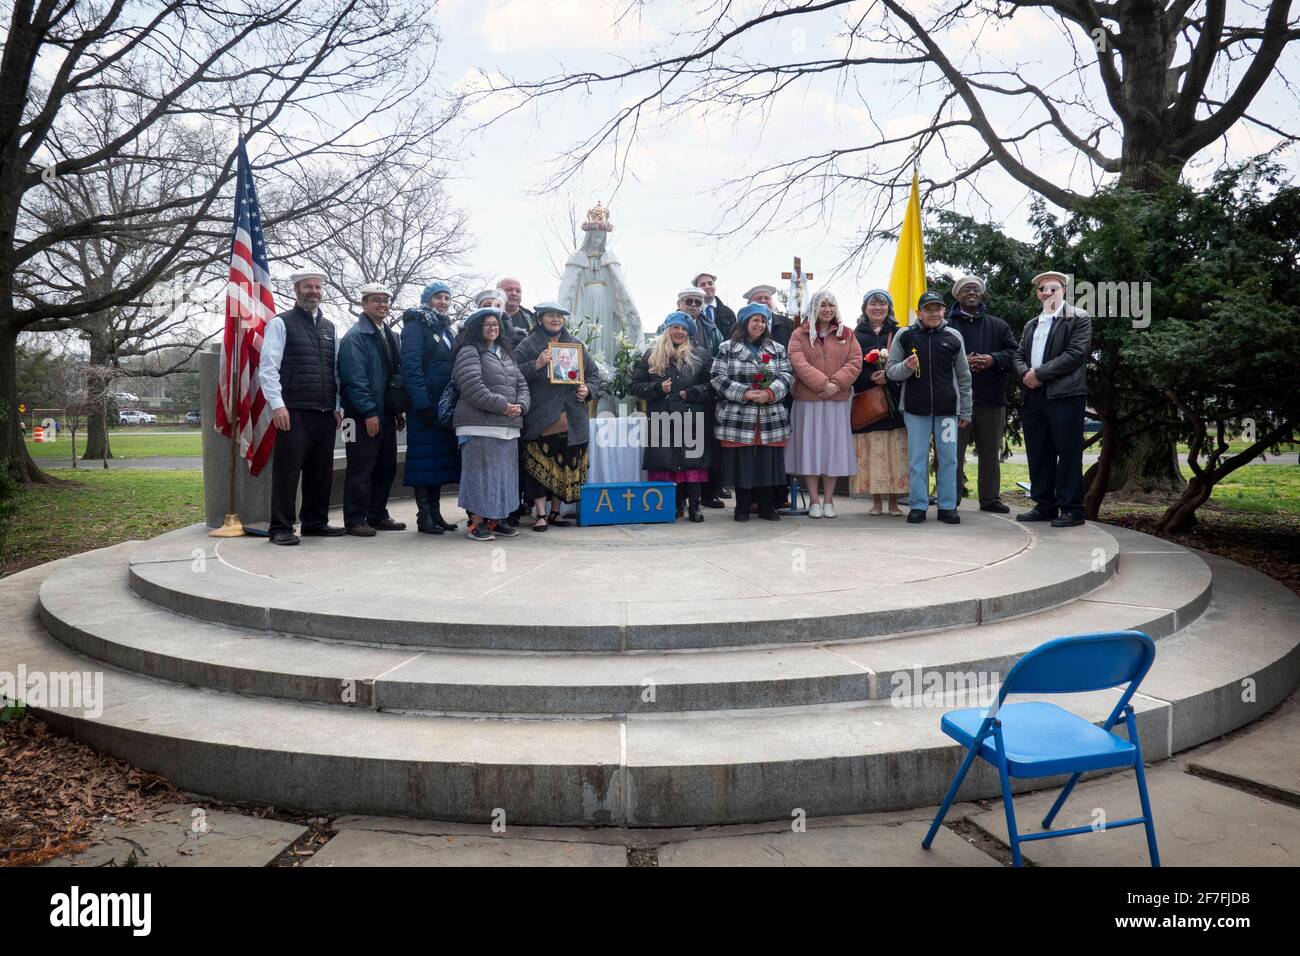 After an outdoor prayer service a group of Roman Catholics pose on their makeshift altar with the chair used by Veronica Lueken in the foreground. Stock Photo